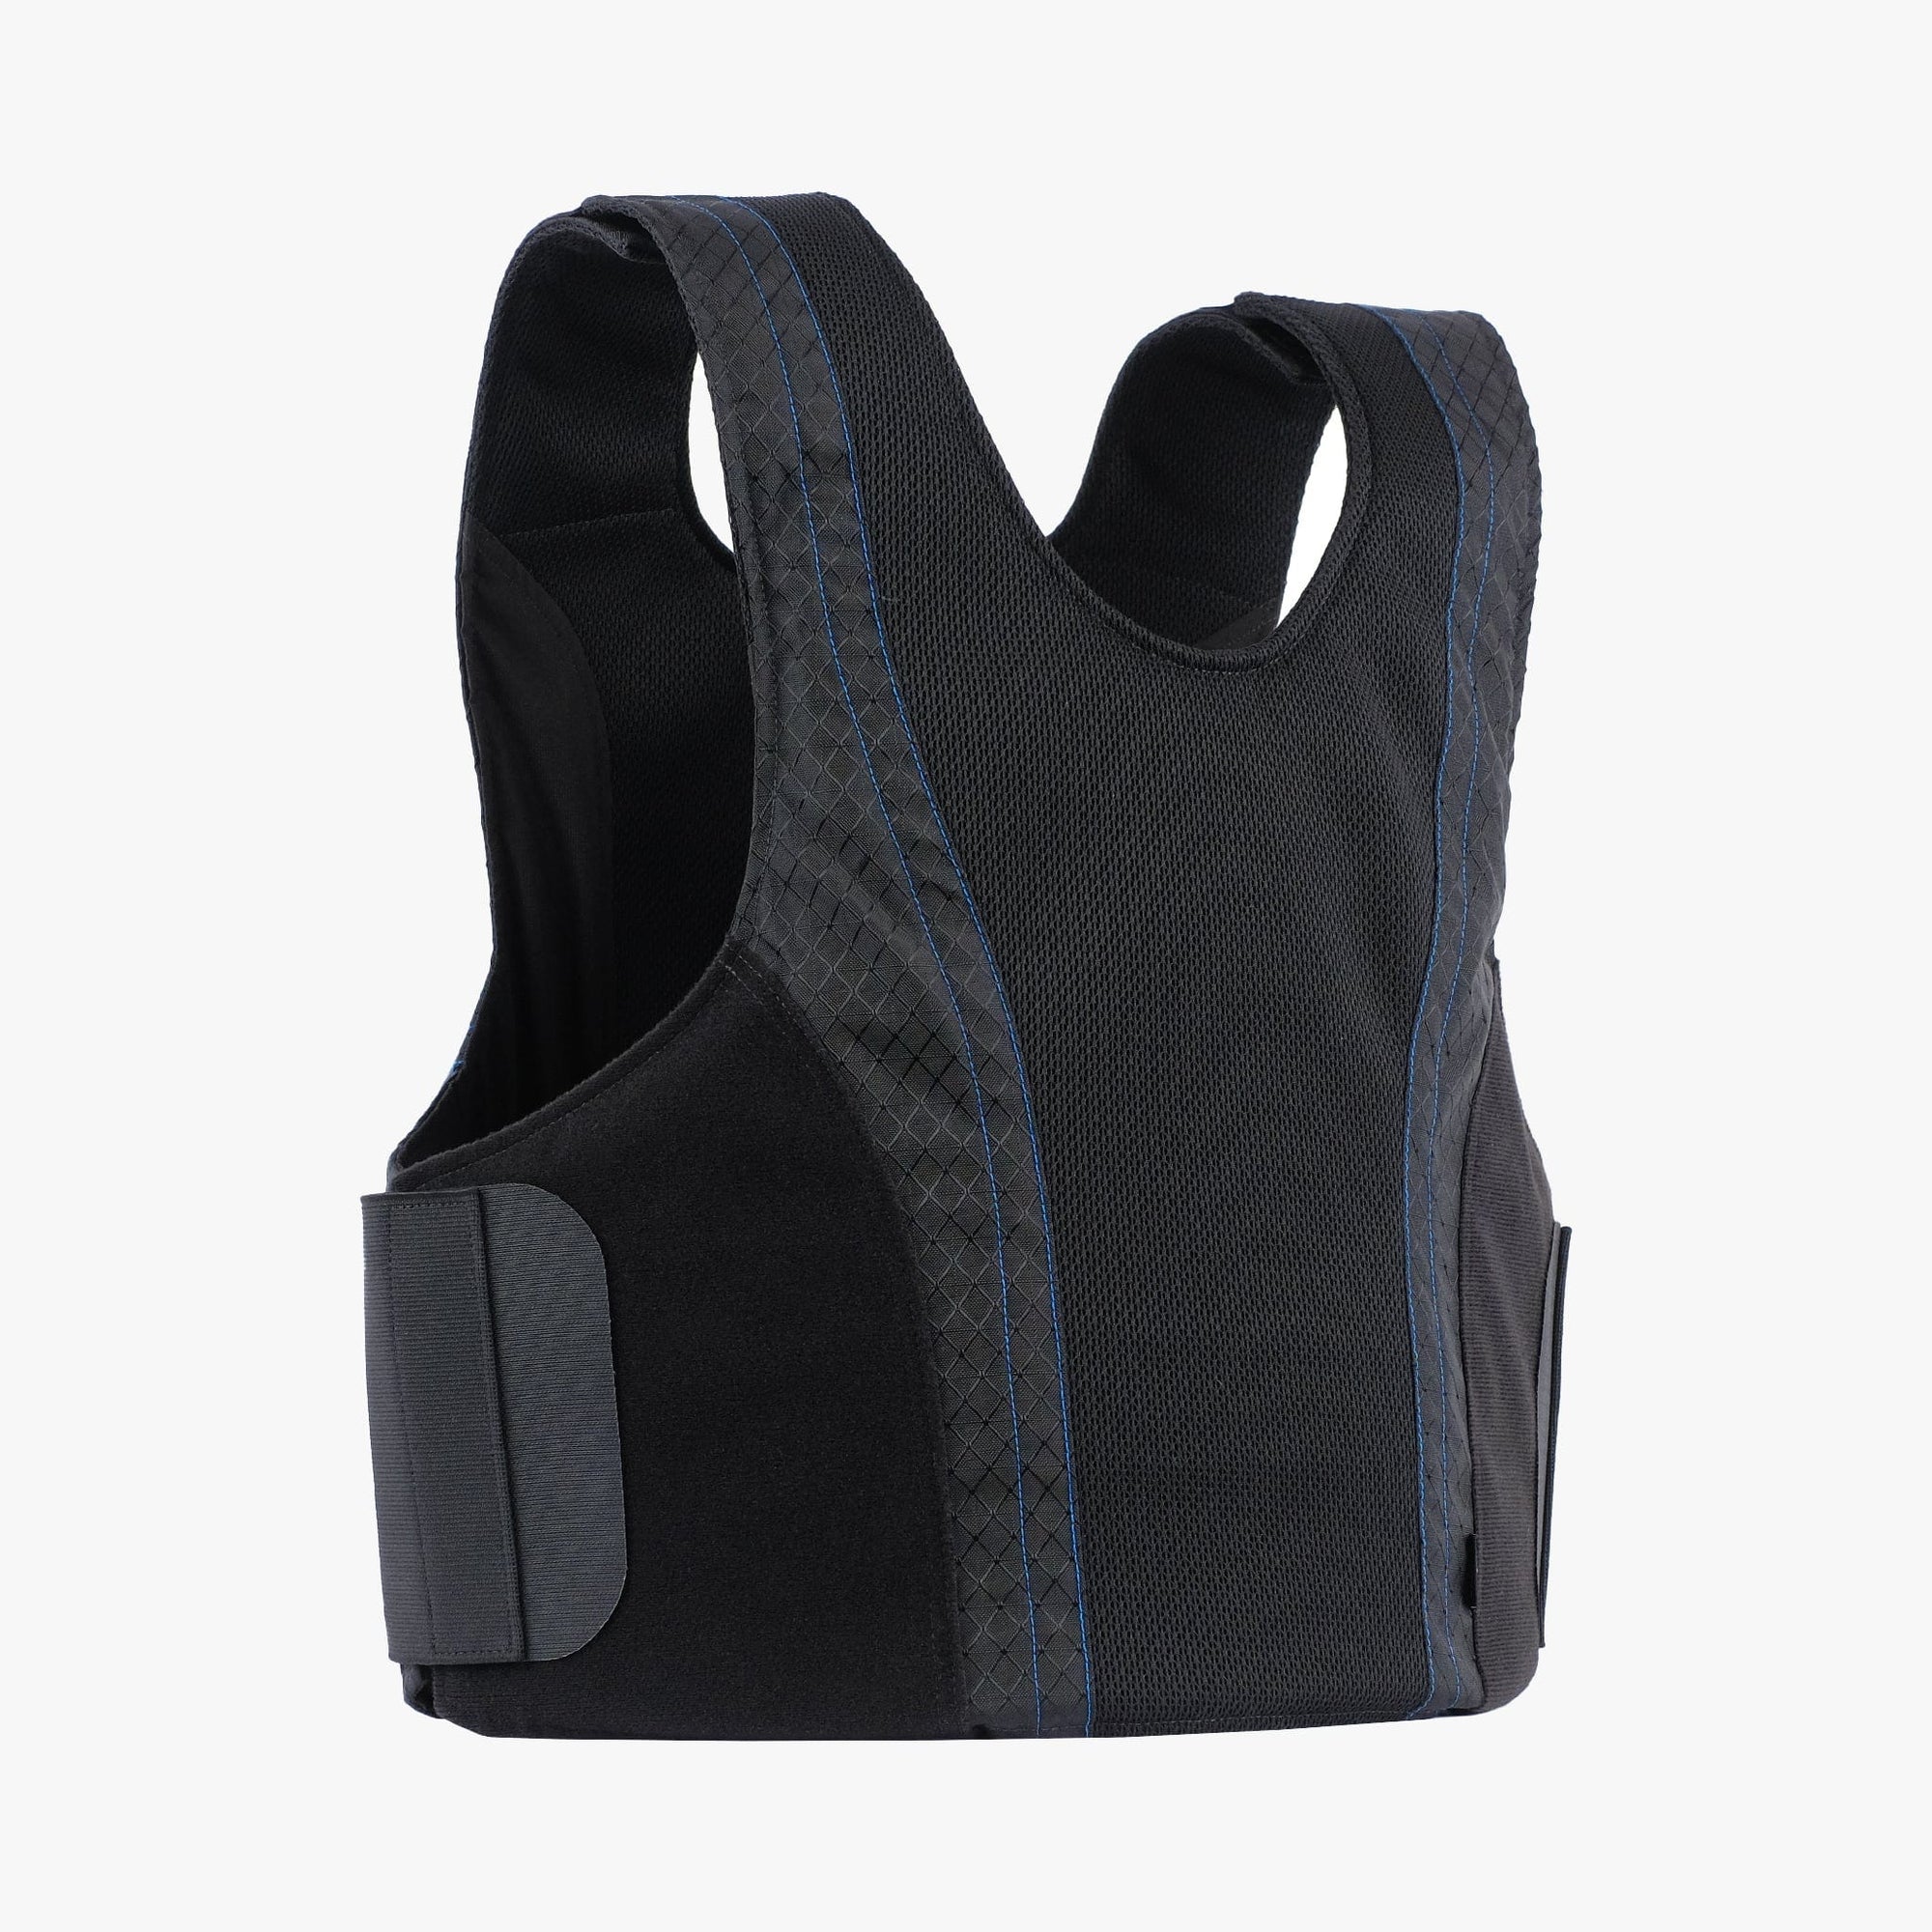 The new Concealable Armor Vest. This 3A soft body armor vest was built for the everyday man. This vest can be used as a concealed body armor vest underneath clothing, or used as an exterior body armor vest. This vest is rugged and comfortable. NIJ Certified Level IIIA body armor vest. 